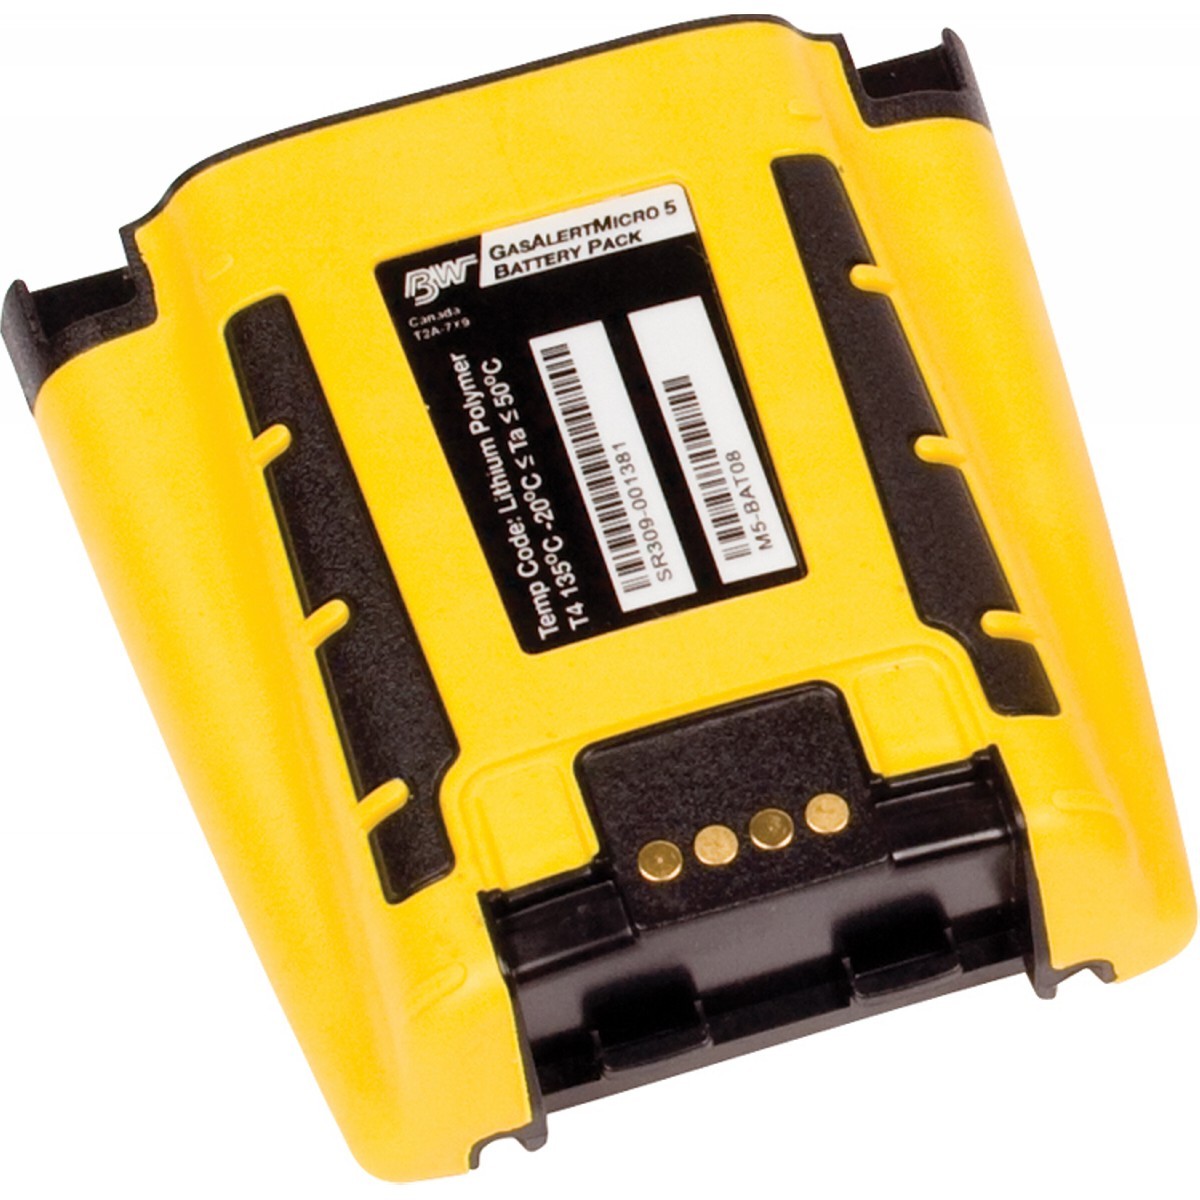 Honeywell Yellow Rechargeable Battery Pack For GasAlertMicro 5 Series Multi-Gas Detector